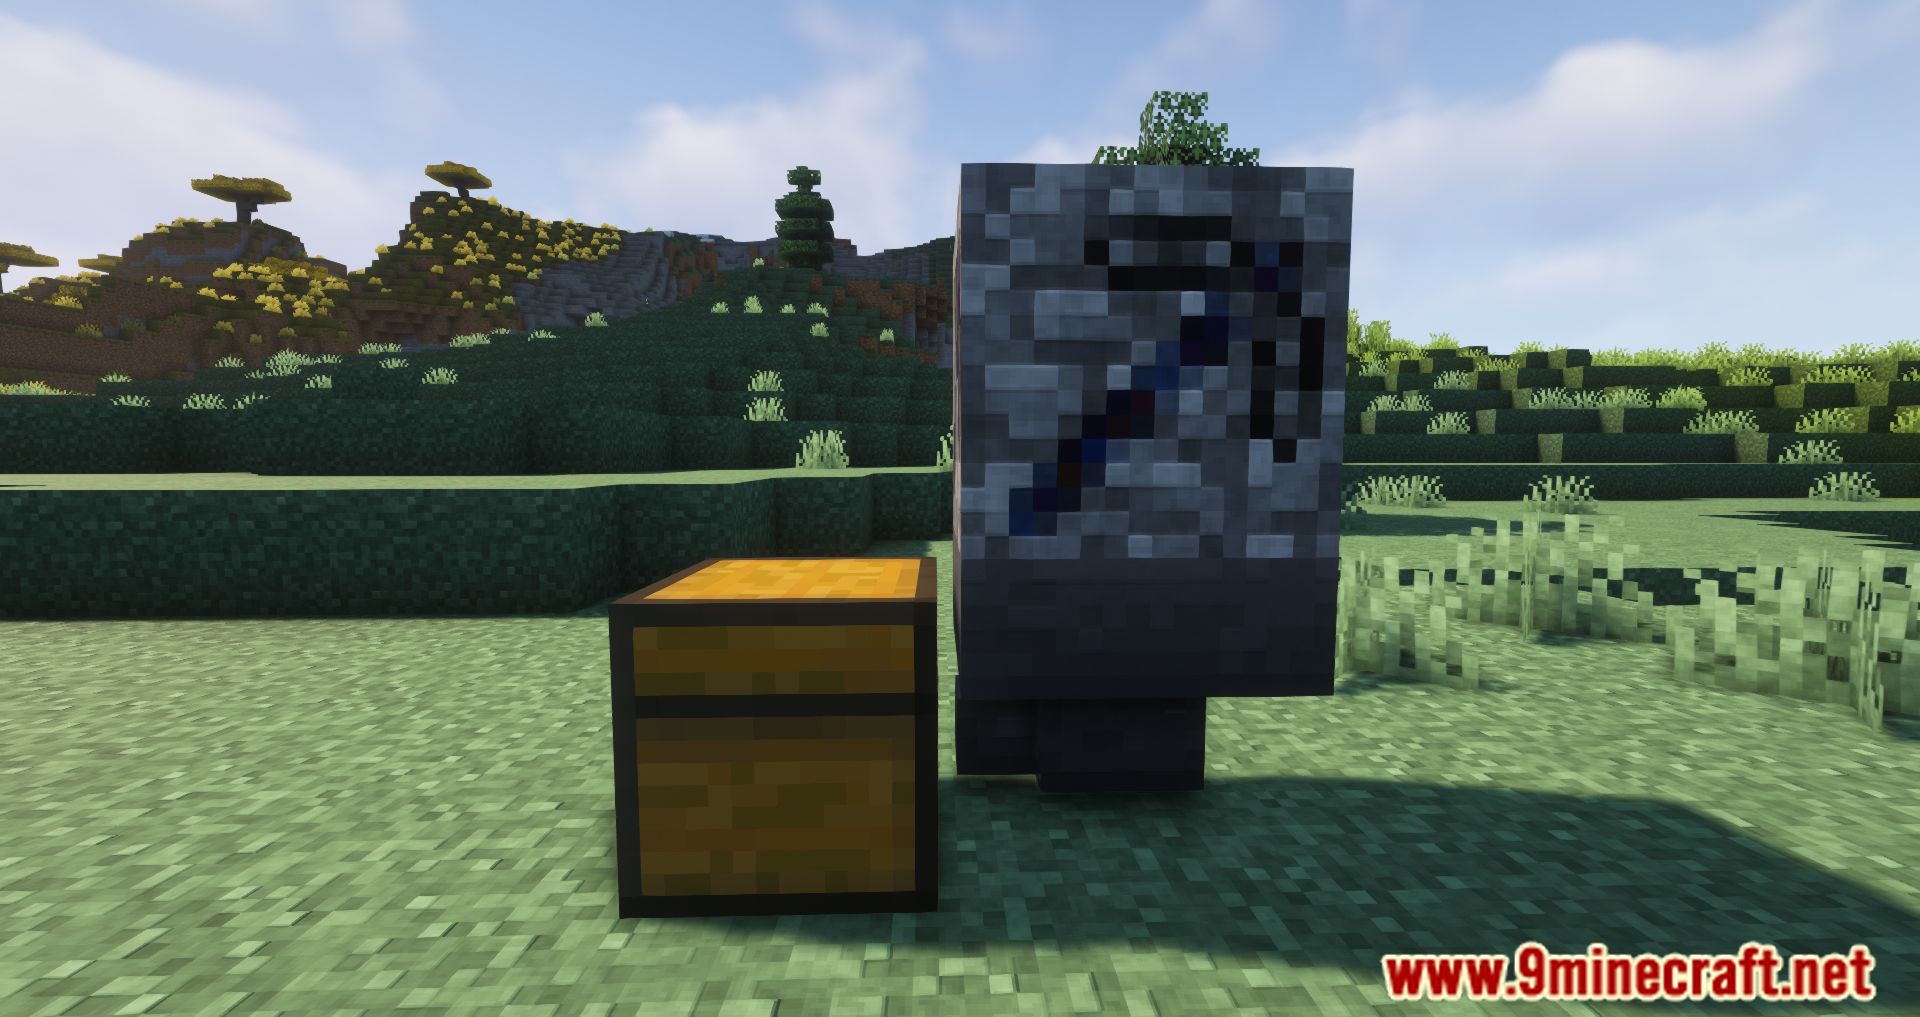 Simple Cobblestone Generator Mod (1.20.4, 1.19.4) - A New Feature Added To The Game 6